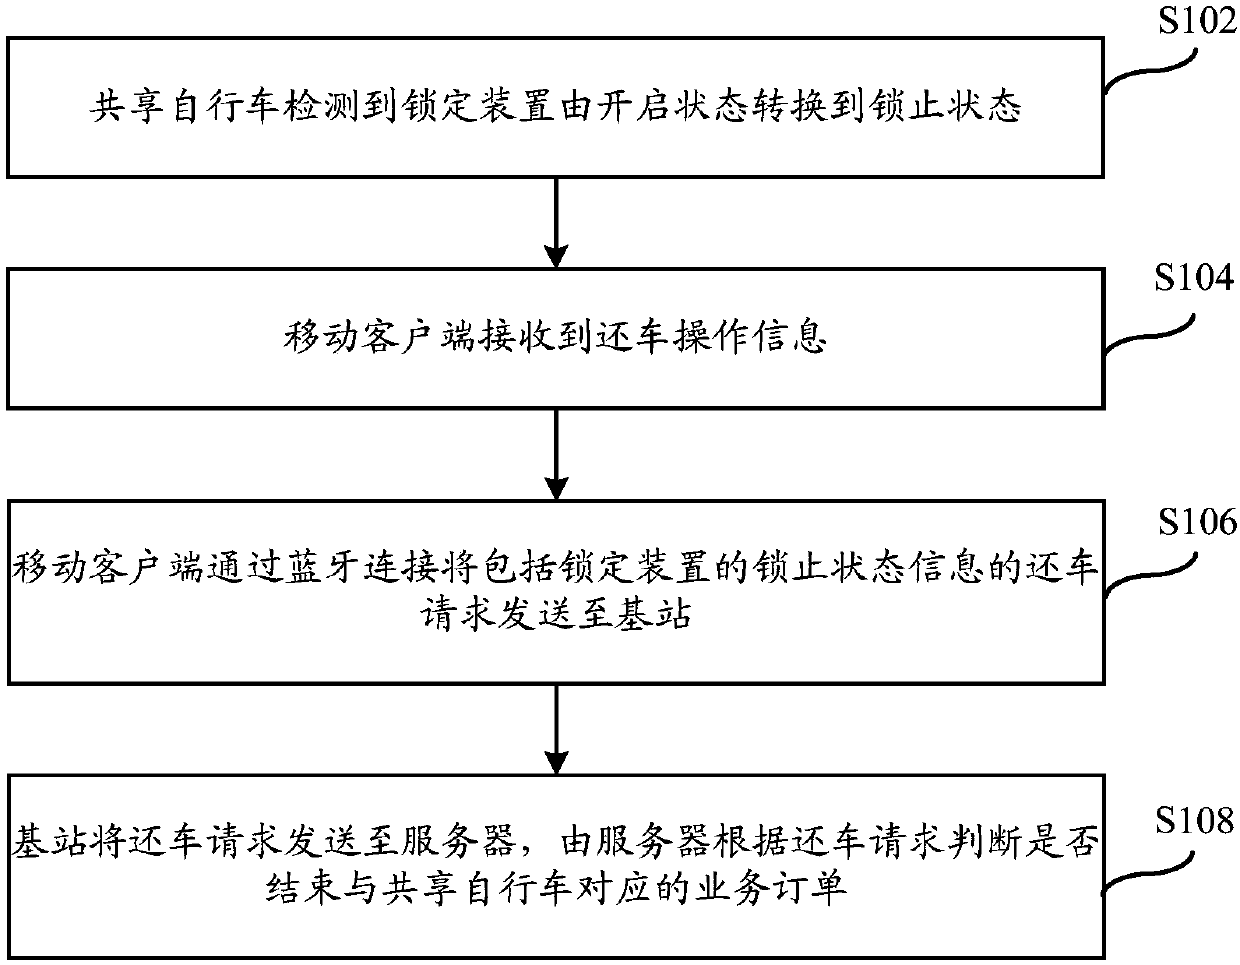 Method and system for managing shared bicycle